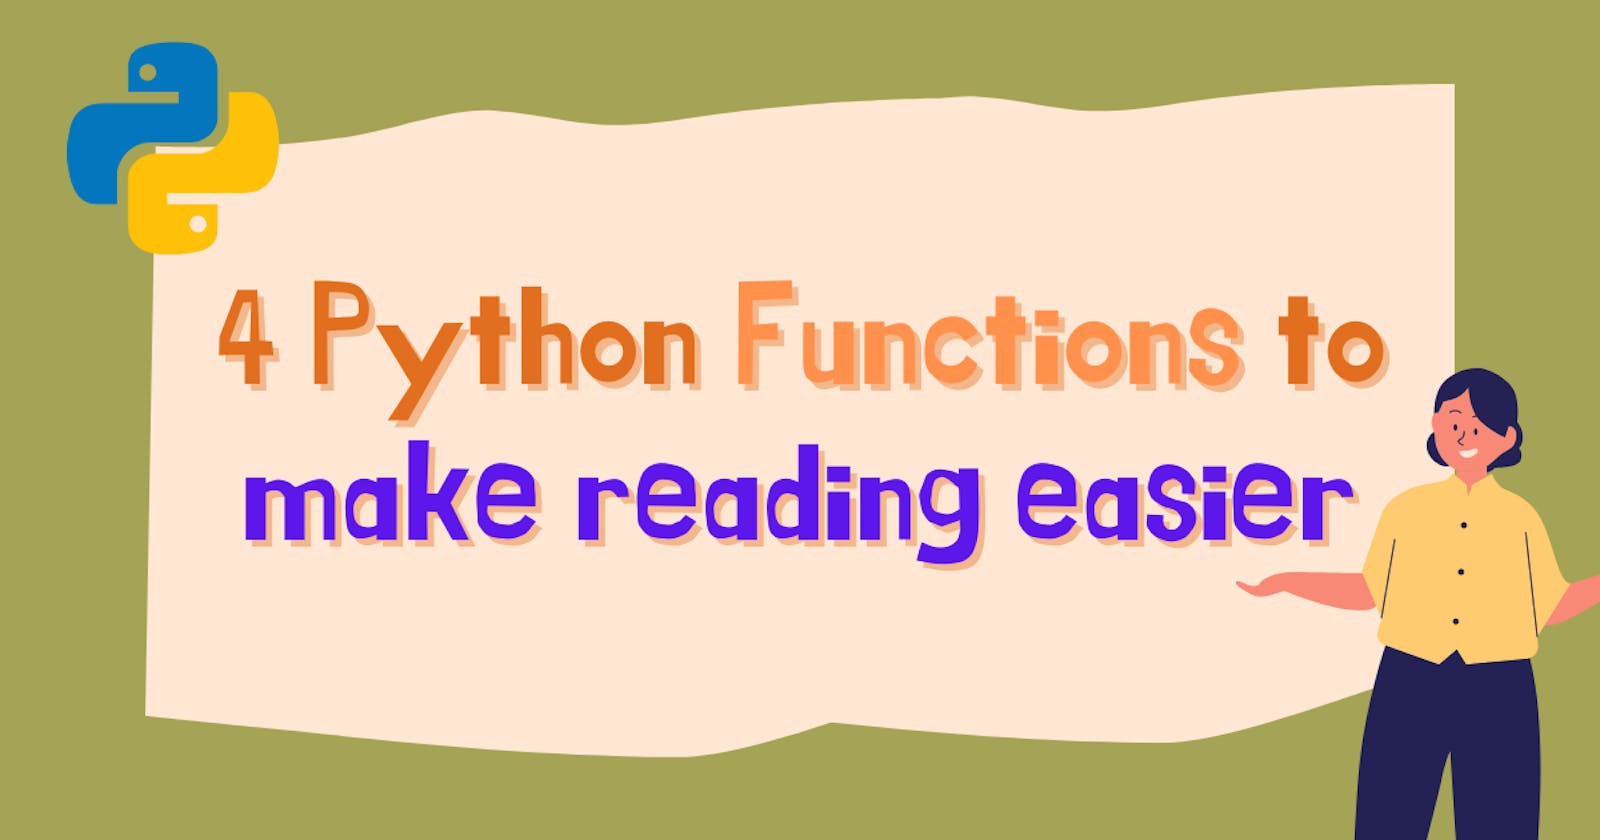 4 Python functions that make reading easier